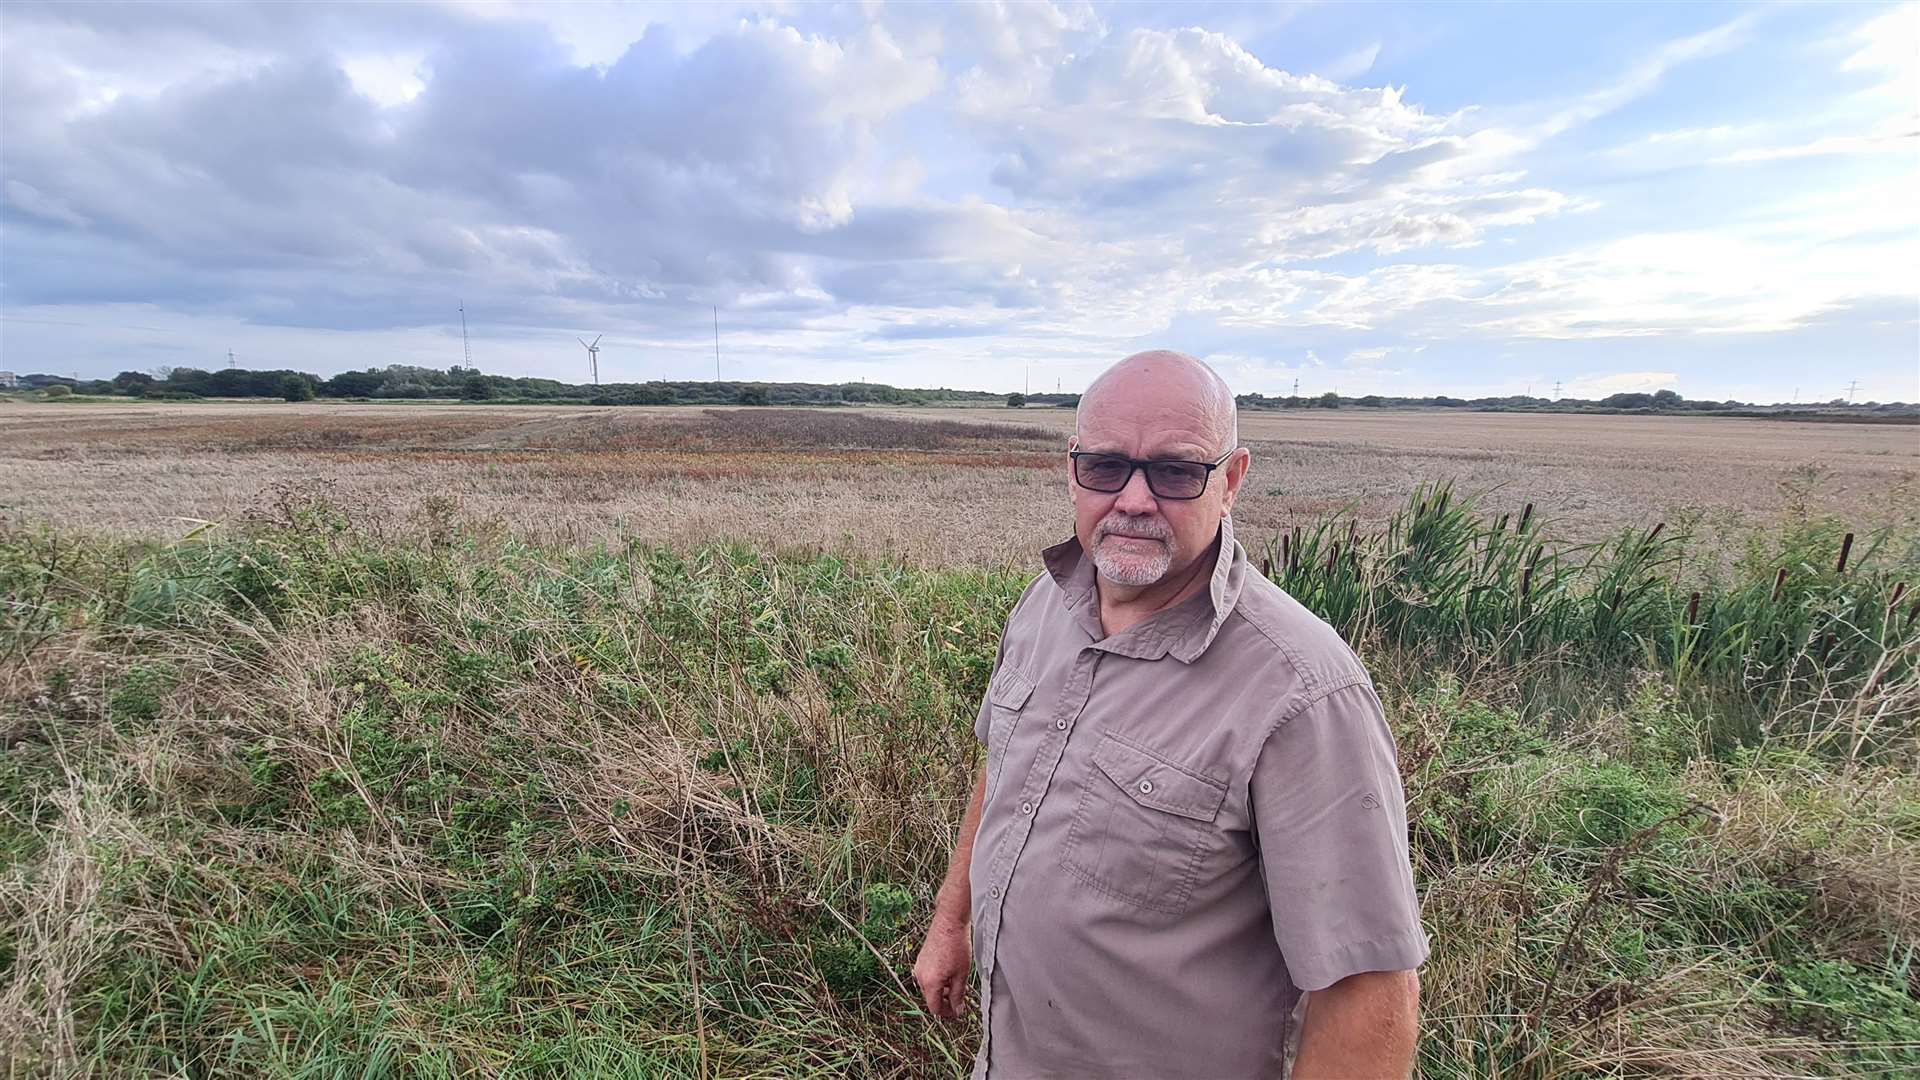 Campaign organiser George Cooper says National Grid's massive converter plant will destroy a precious wildlife habitat on Minster marshes